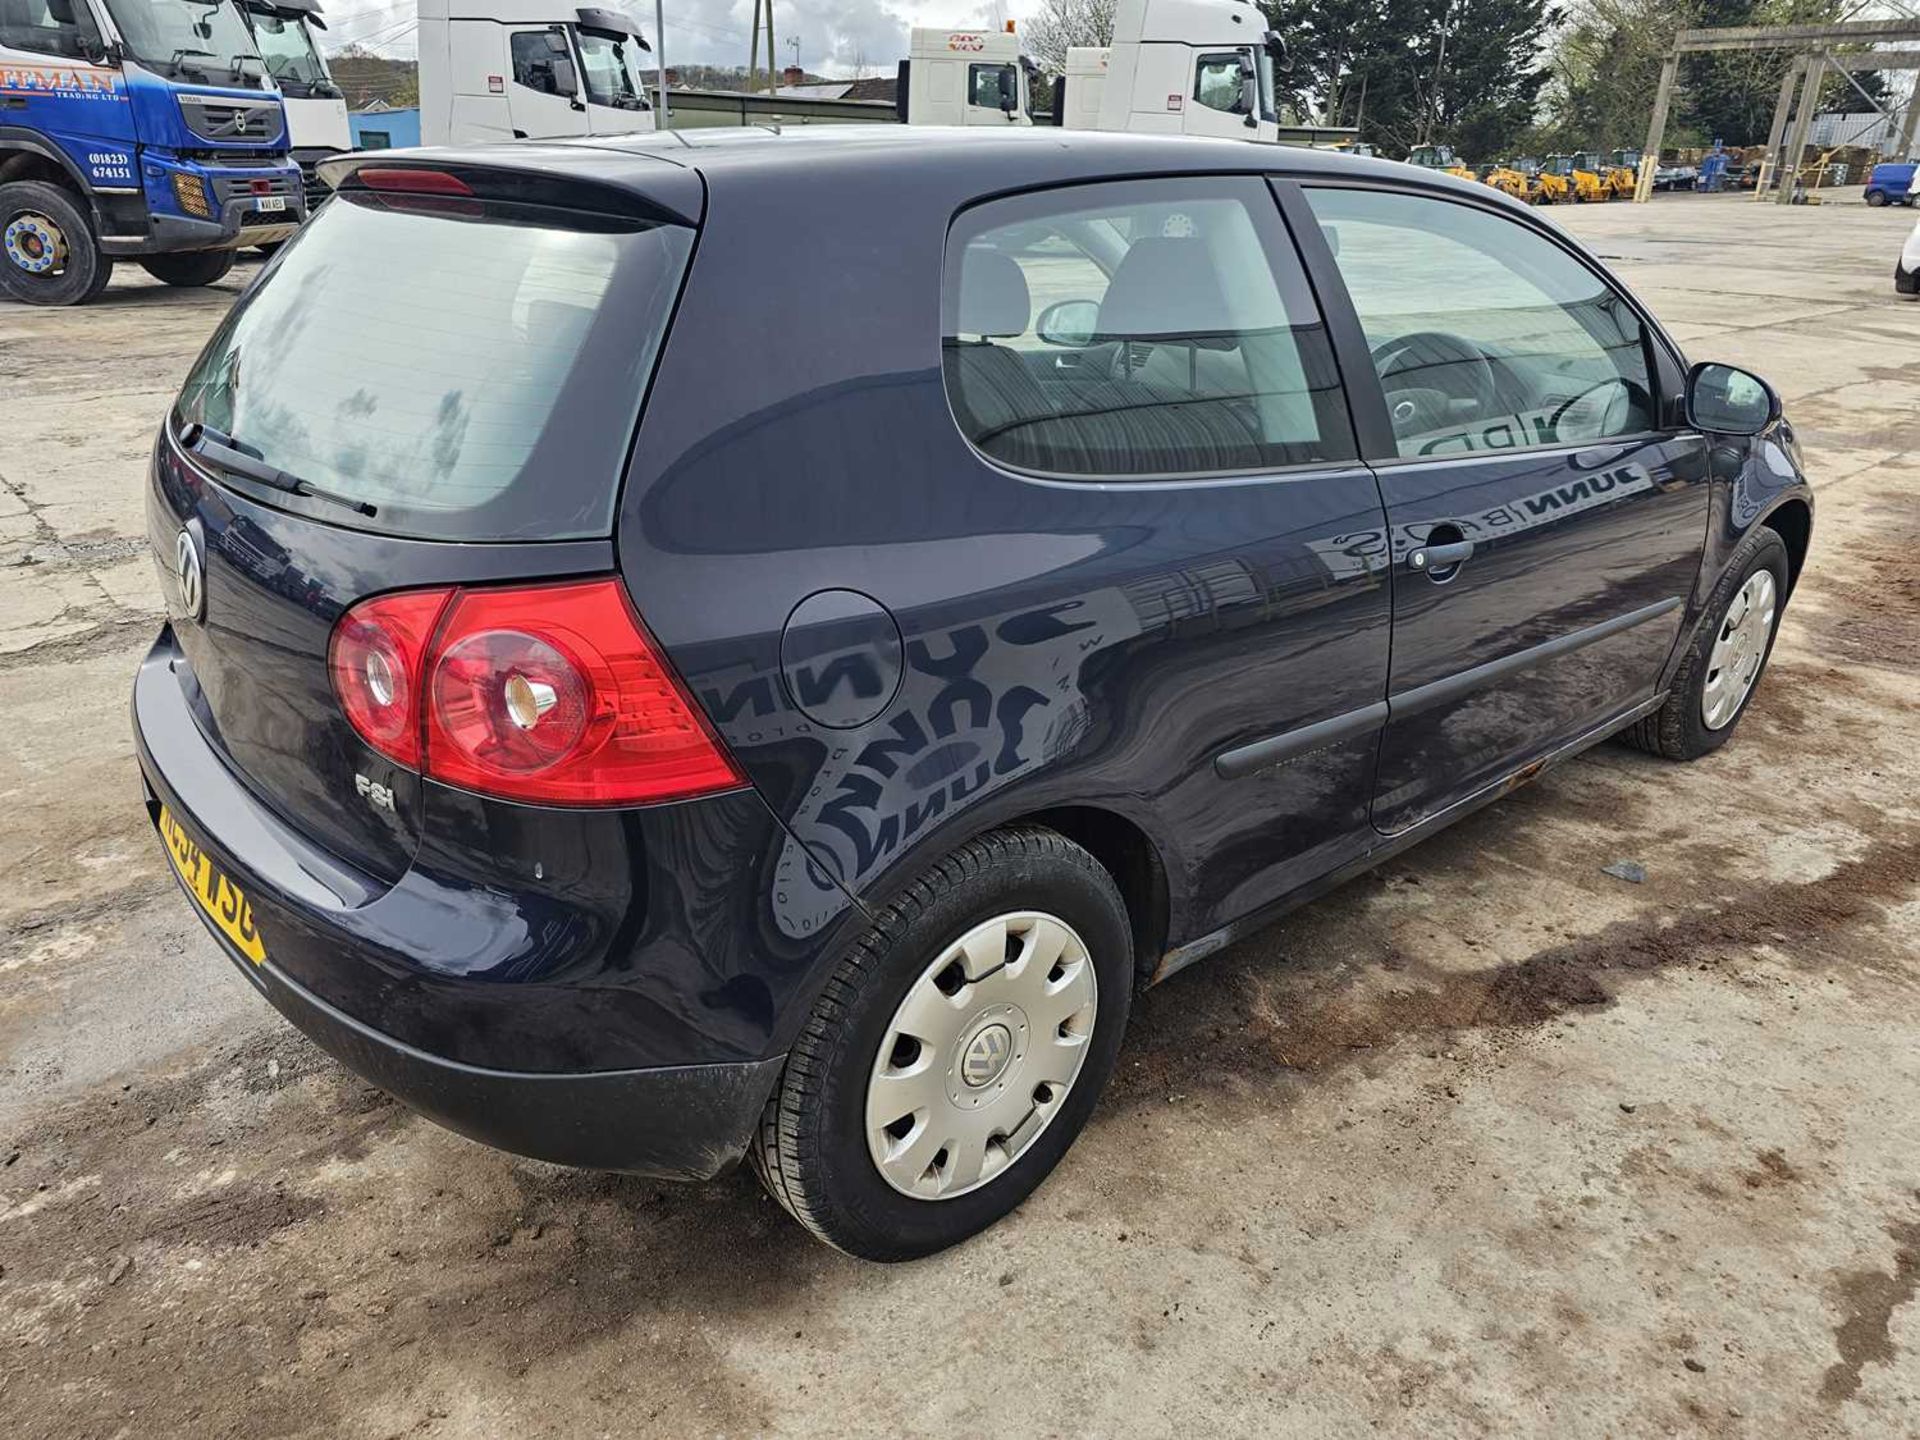 2005 Volkswagen Golf FSi S, 5 Speed, A/C (Reg. Docs. Available) - Image 7 of 27